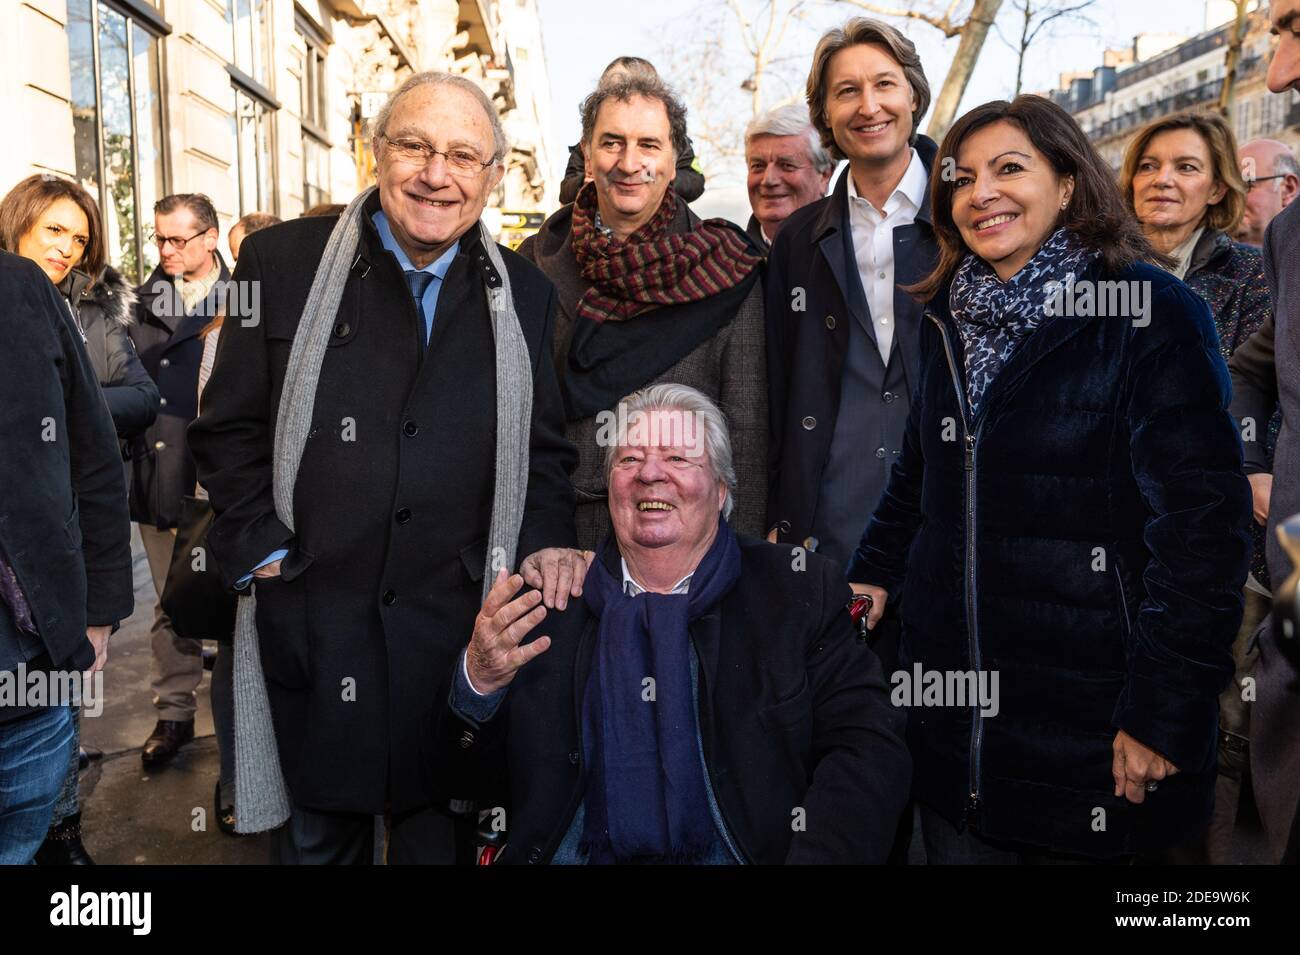 Anne Hidalgo (R.), Mayor of Paris, unveils a wall fresco from a artwork of artist Jean-Jacques Sempe (C. sitting) in presence of the artist, Jacques Aidenbaum (L.), Mayor of the 3rd District, Jean Jacques Decaux, chairman of JC Decaux, François Morel (C. standing) actor and director and Jean Marie Havan artist who painted the wall, at the crossing of Boulevard des Filles du Calvaire and Rue Froissard, 3rd District of Paris, France, Febuary 16th, 2019. Photo by Daniel Derajinski/ABACAPRESS.COM Stock Photo